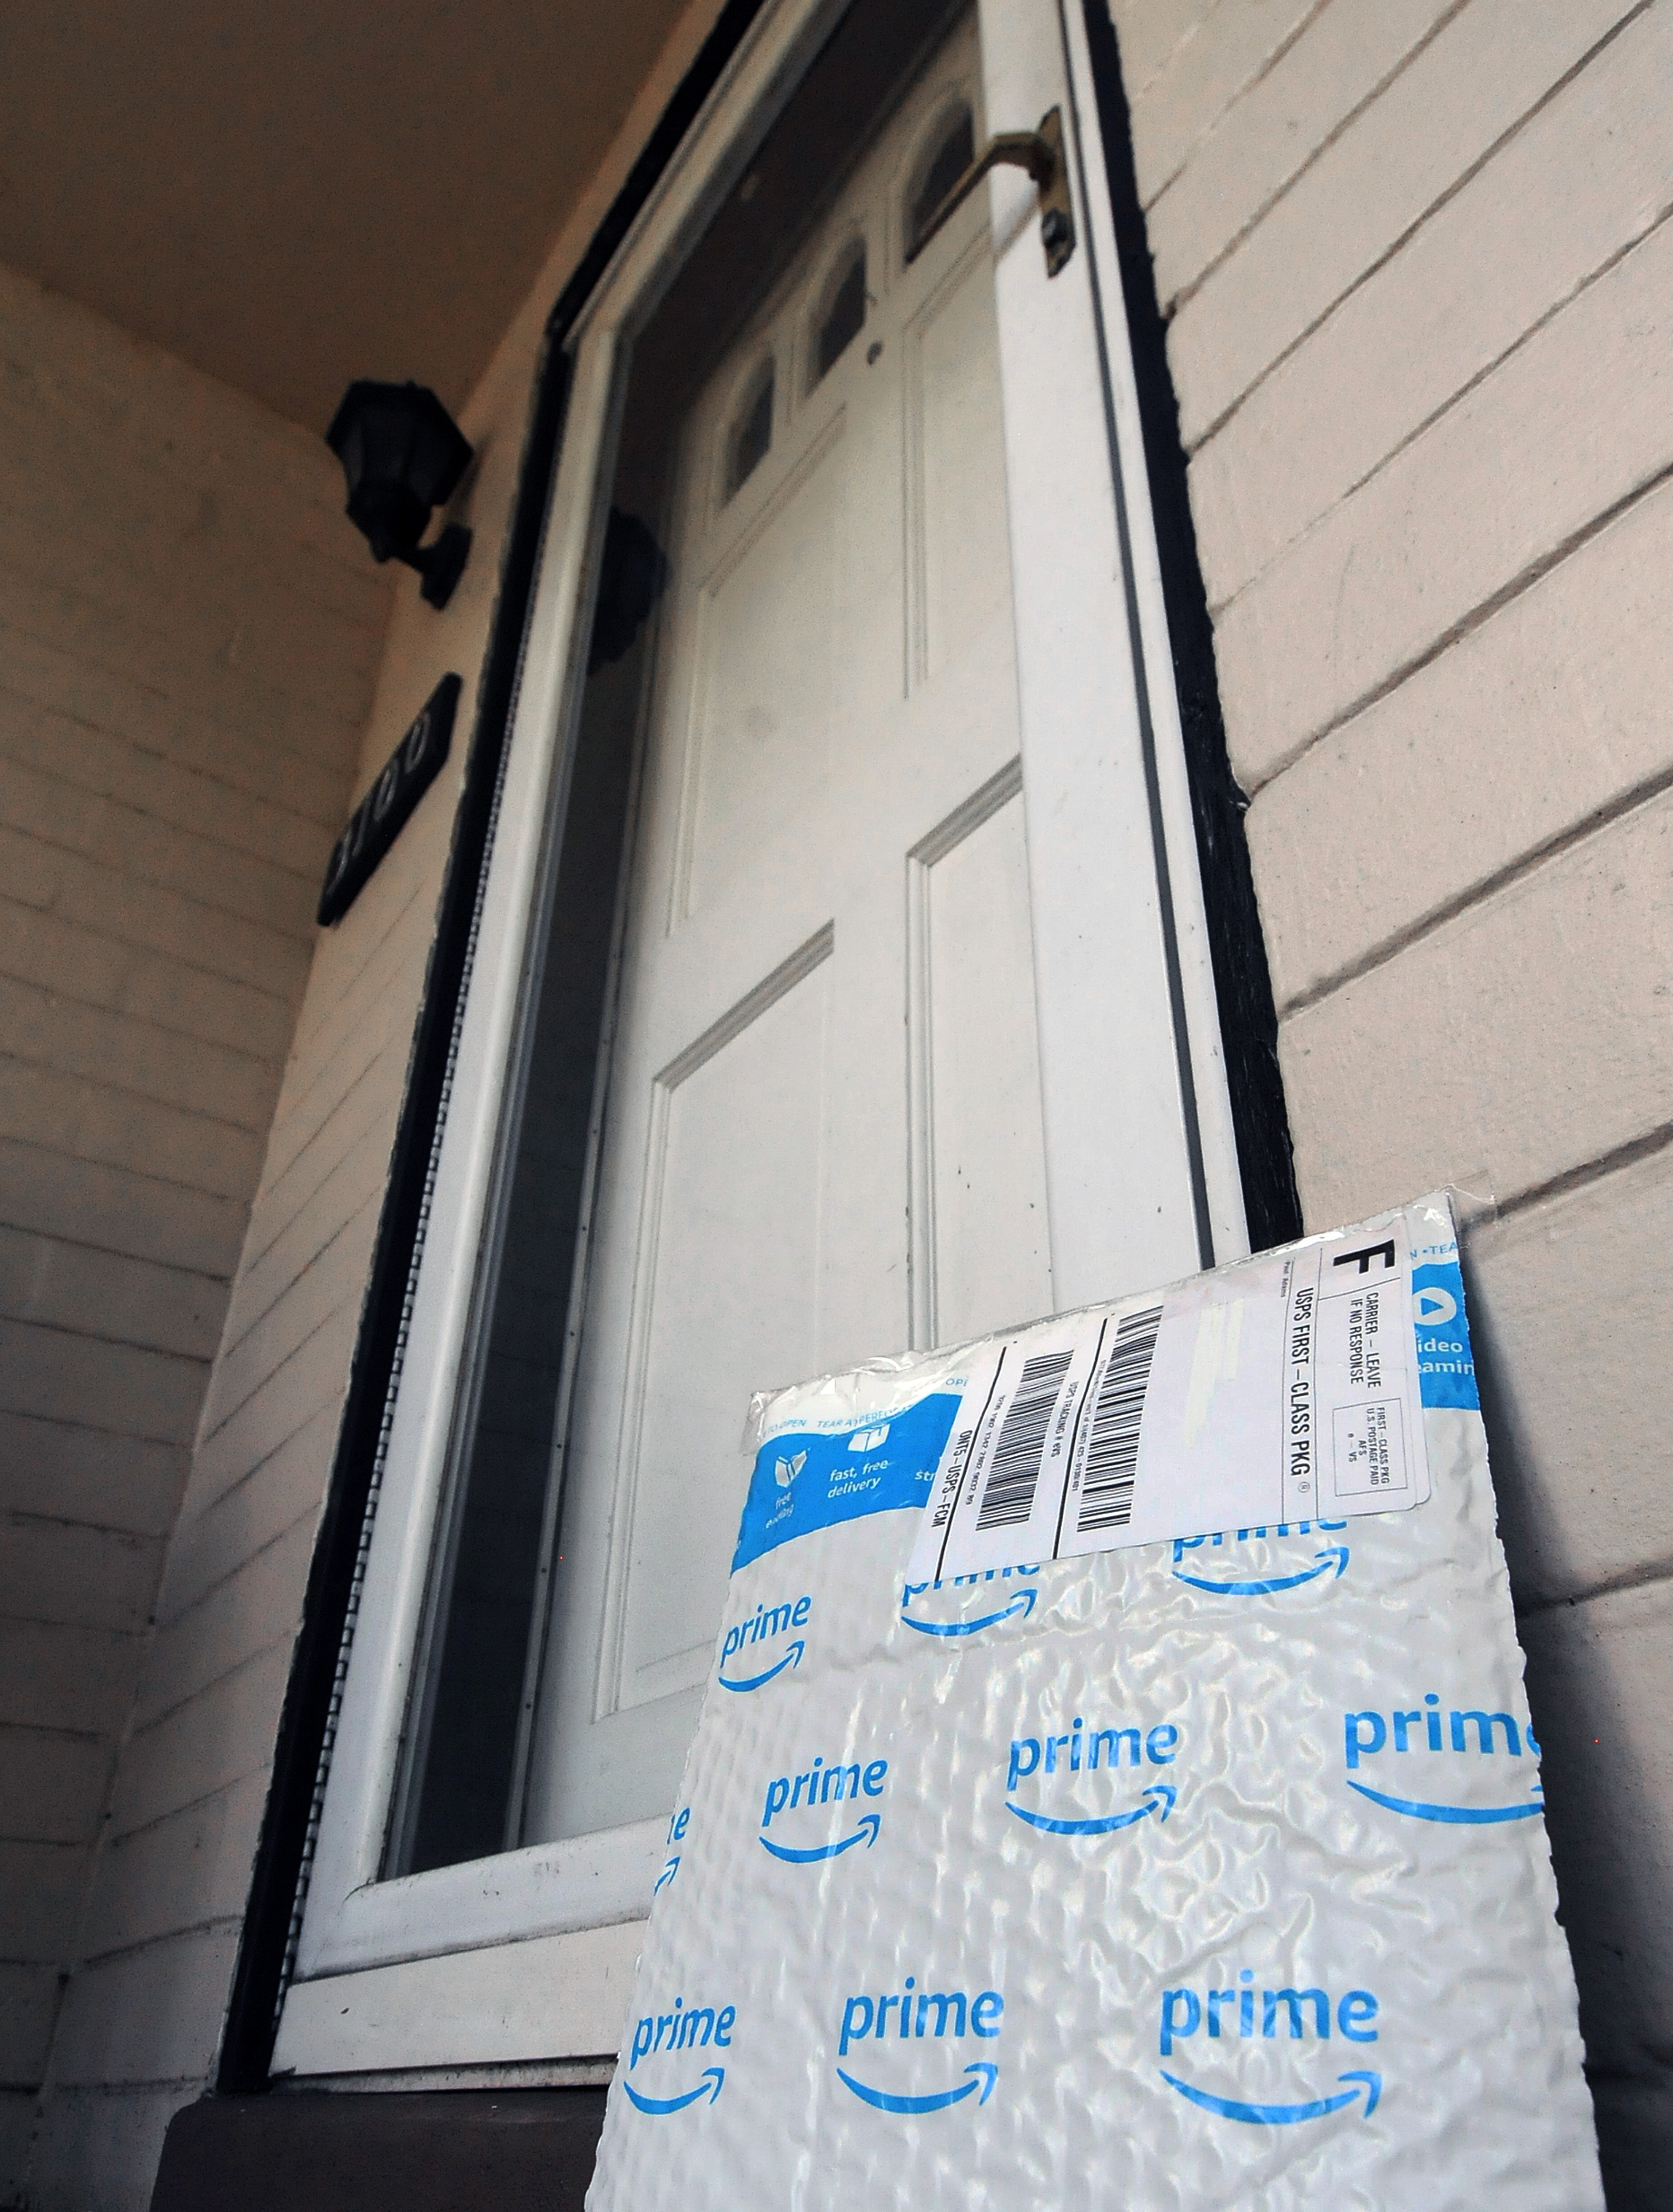 An Amazon Prime padded envelope leans against the exterior of a front door.